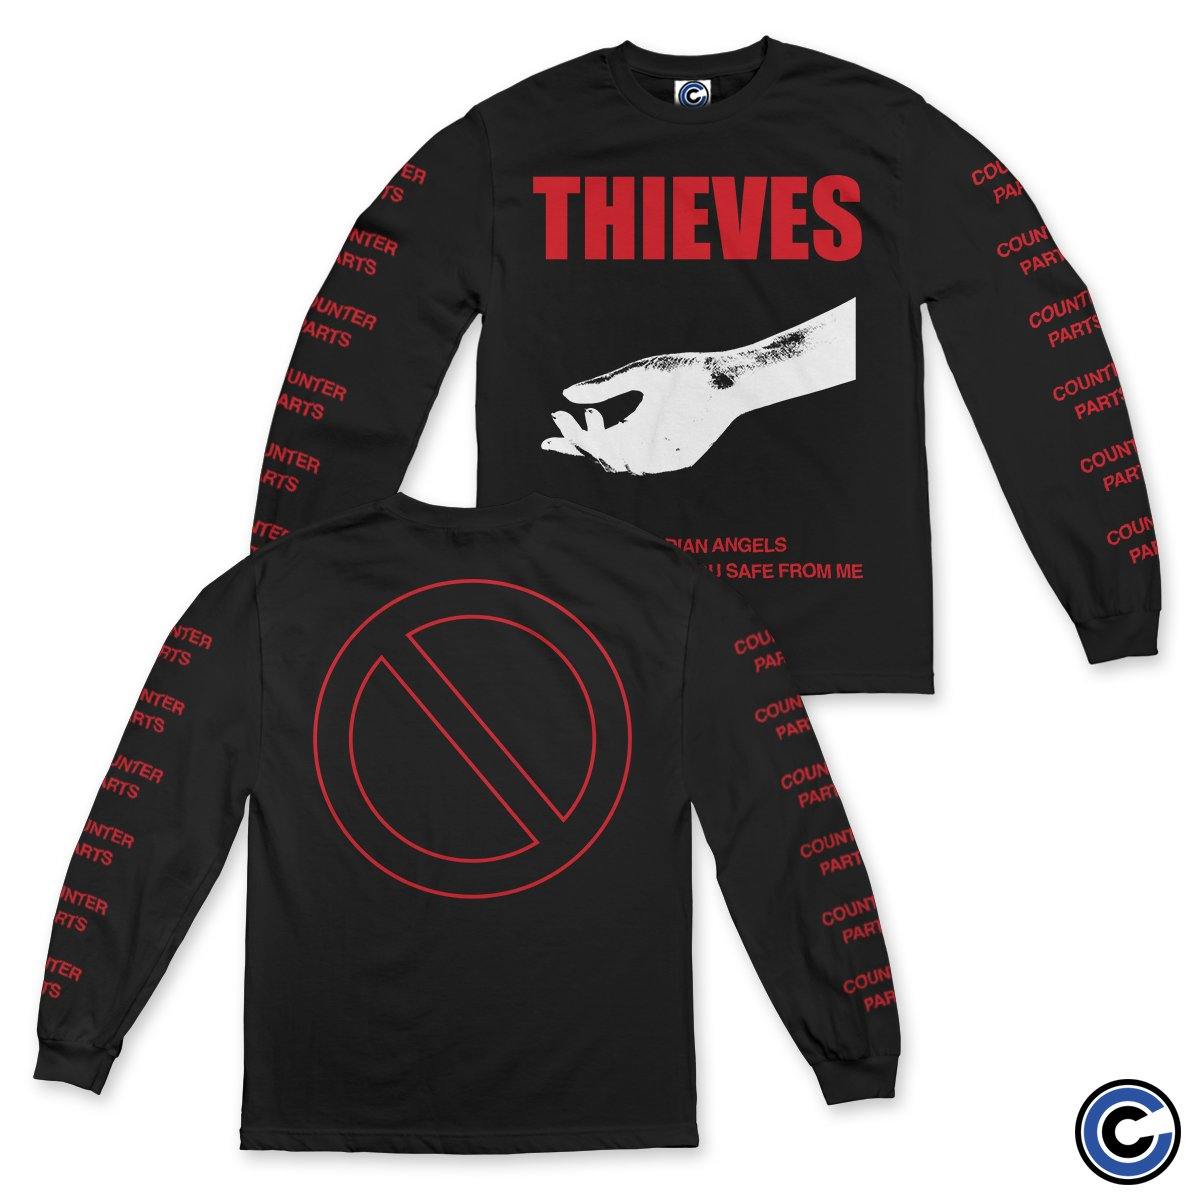 Buy – Counterparts "Thieves" Long Sleeve – Band & Music Merch – Cold Cuts Merch